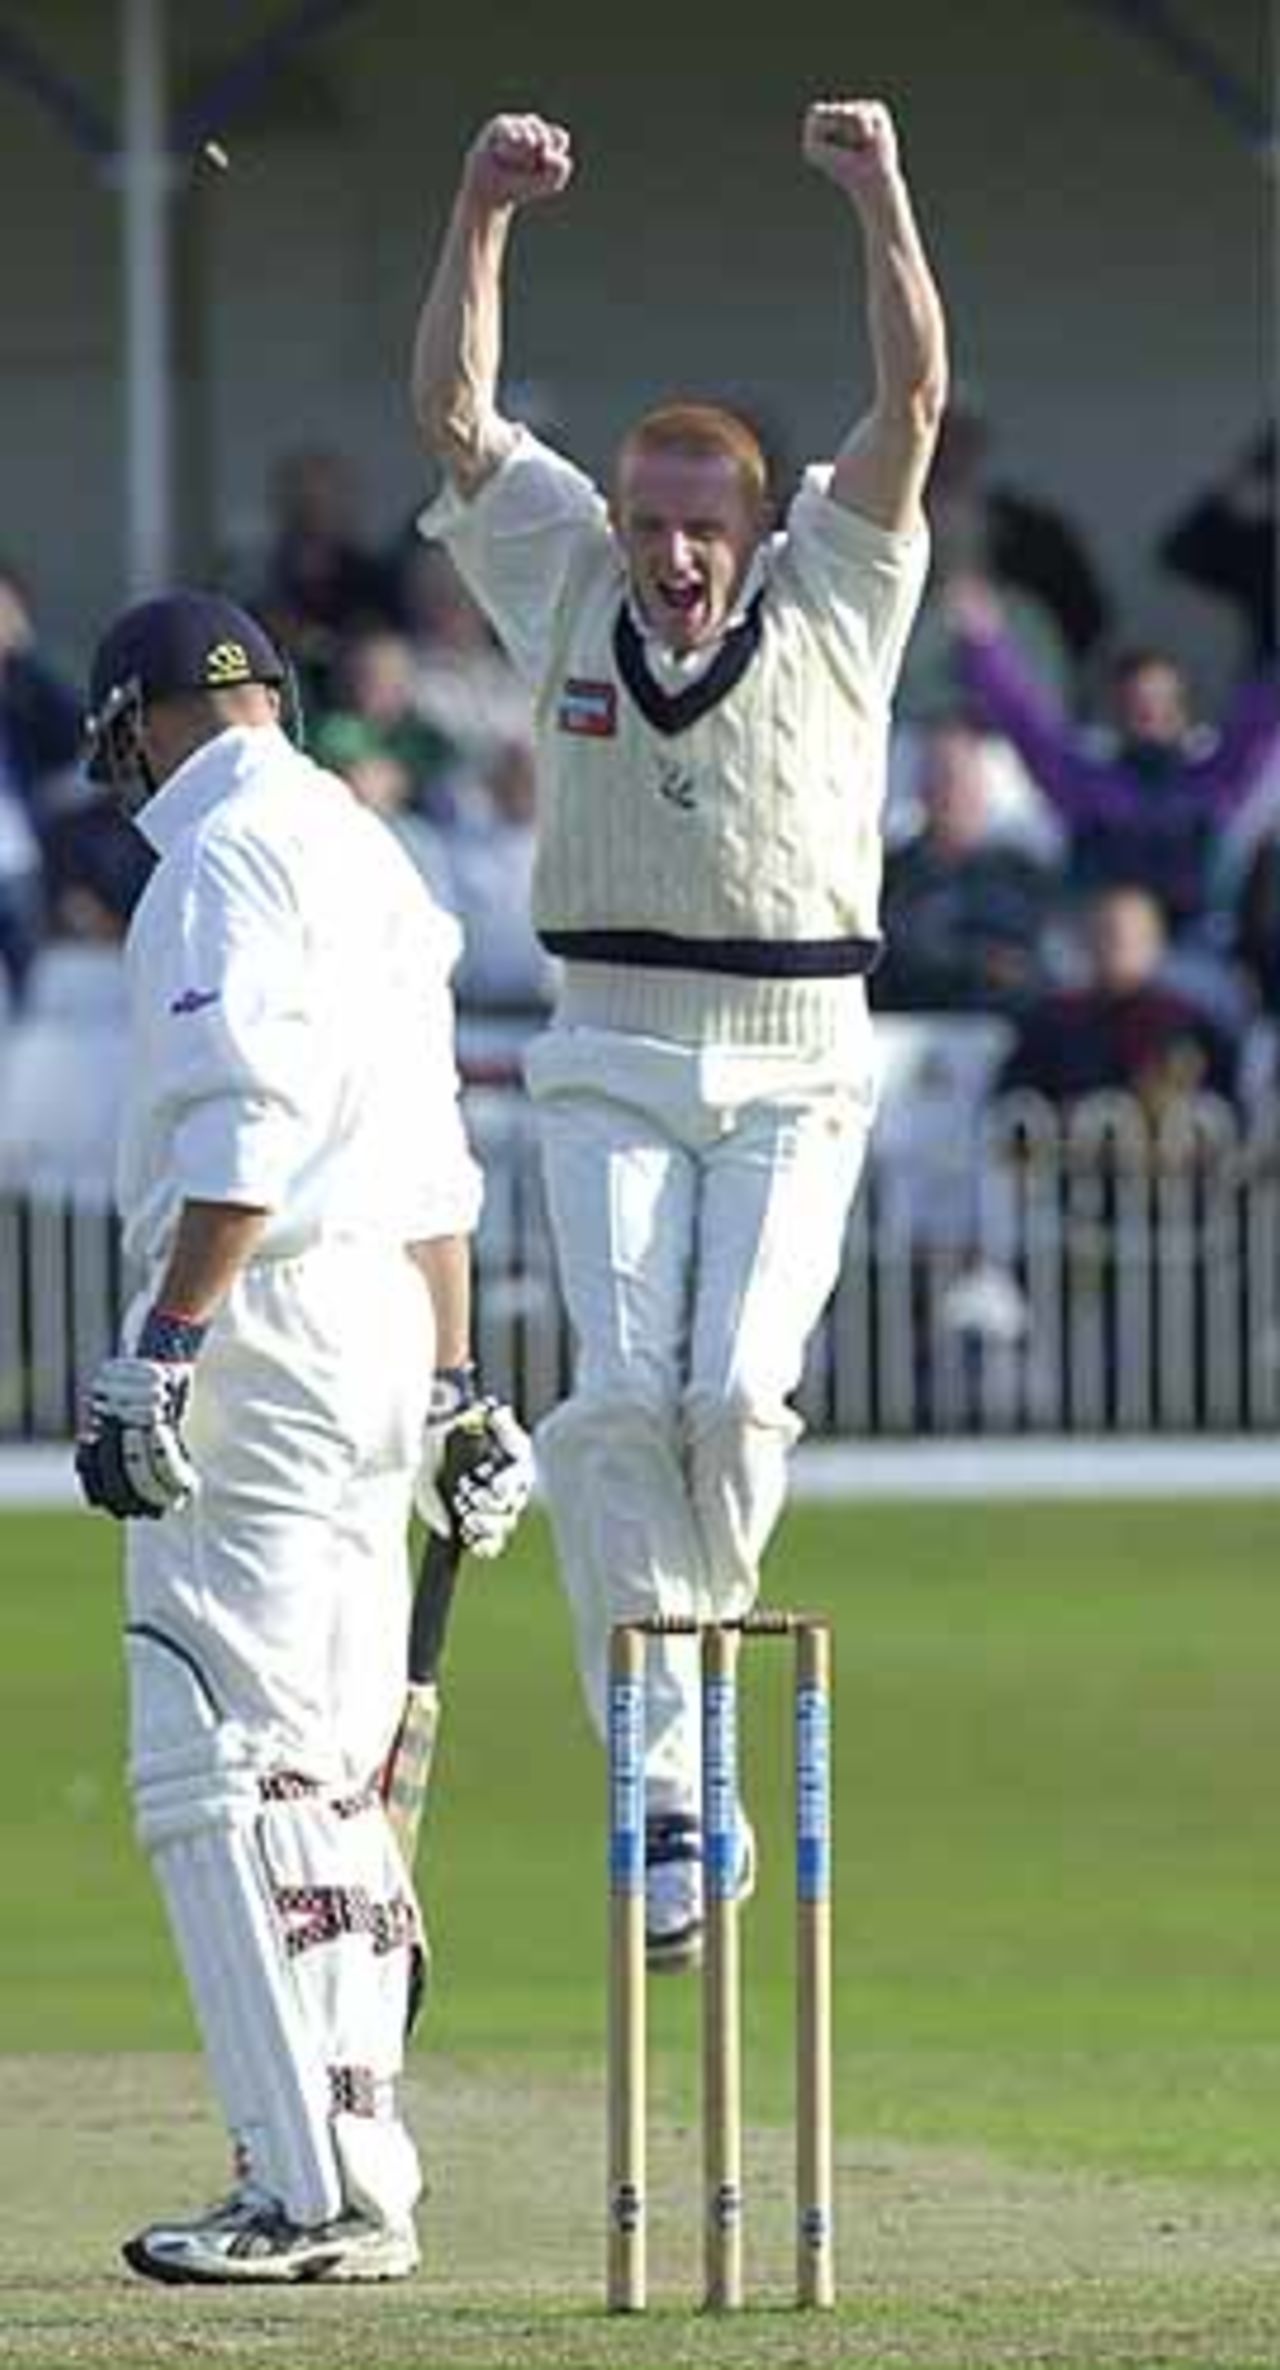 Stephen Kirby has just gained the wicket of Richard Clinton in the Essex second innings, Scarborough 14th Sep 2001